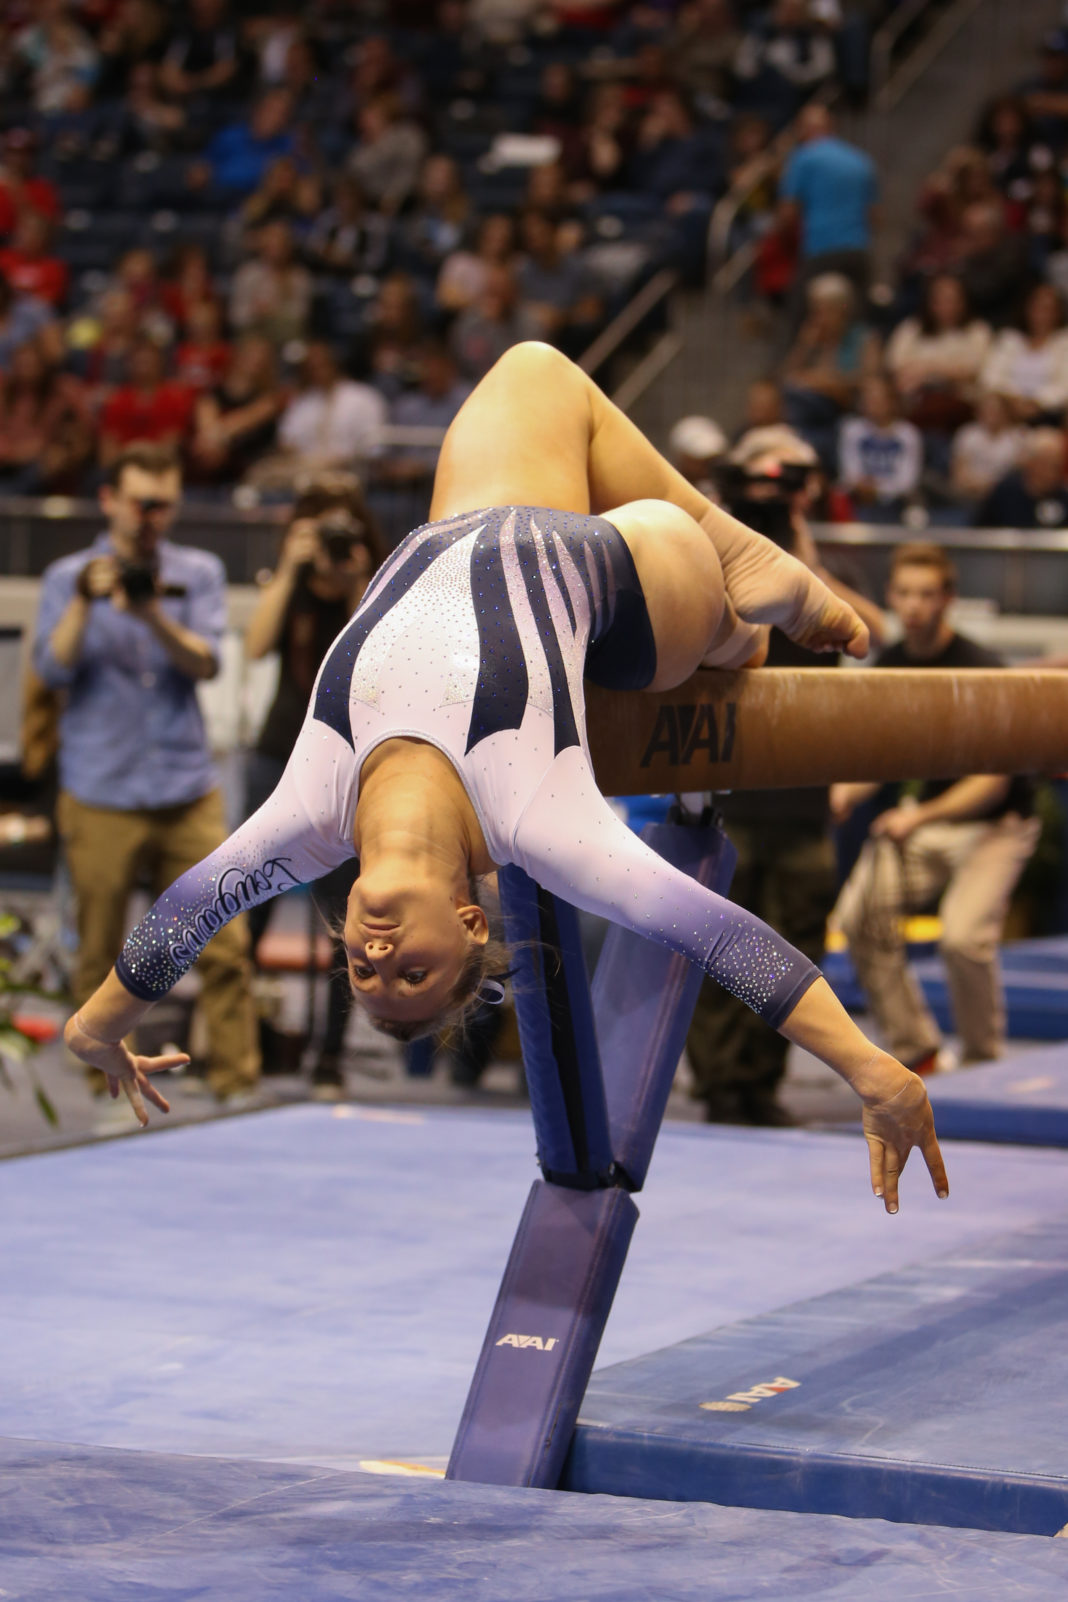 Byu Gymnasts Take On The 10 Year Challenge The Daily Universe 